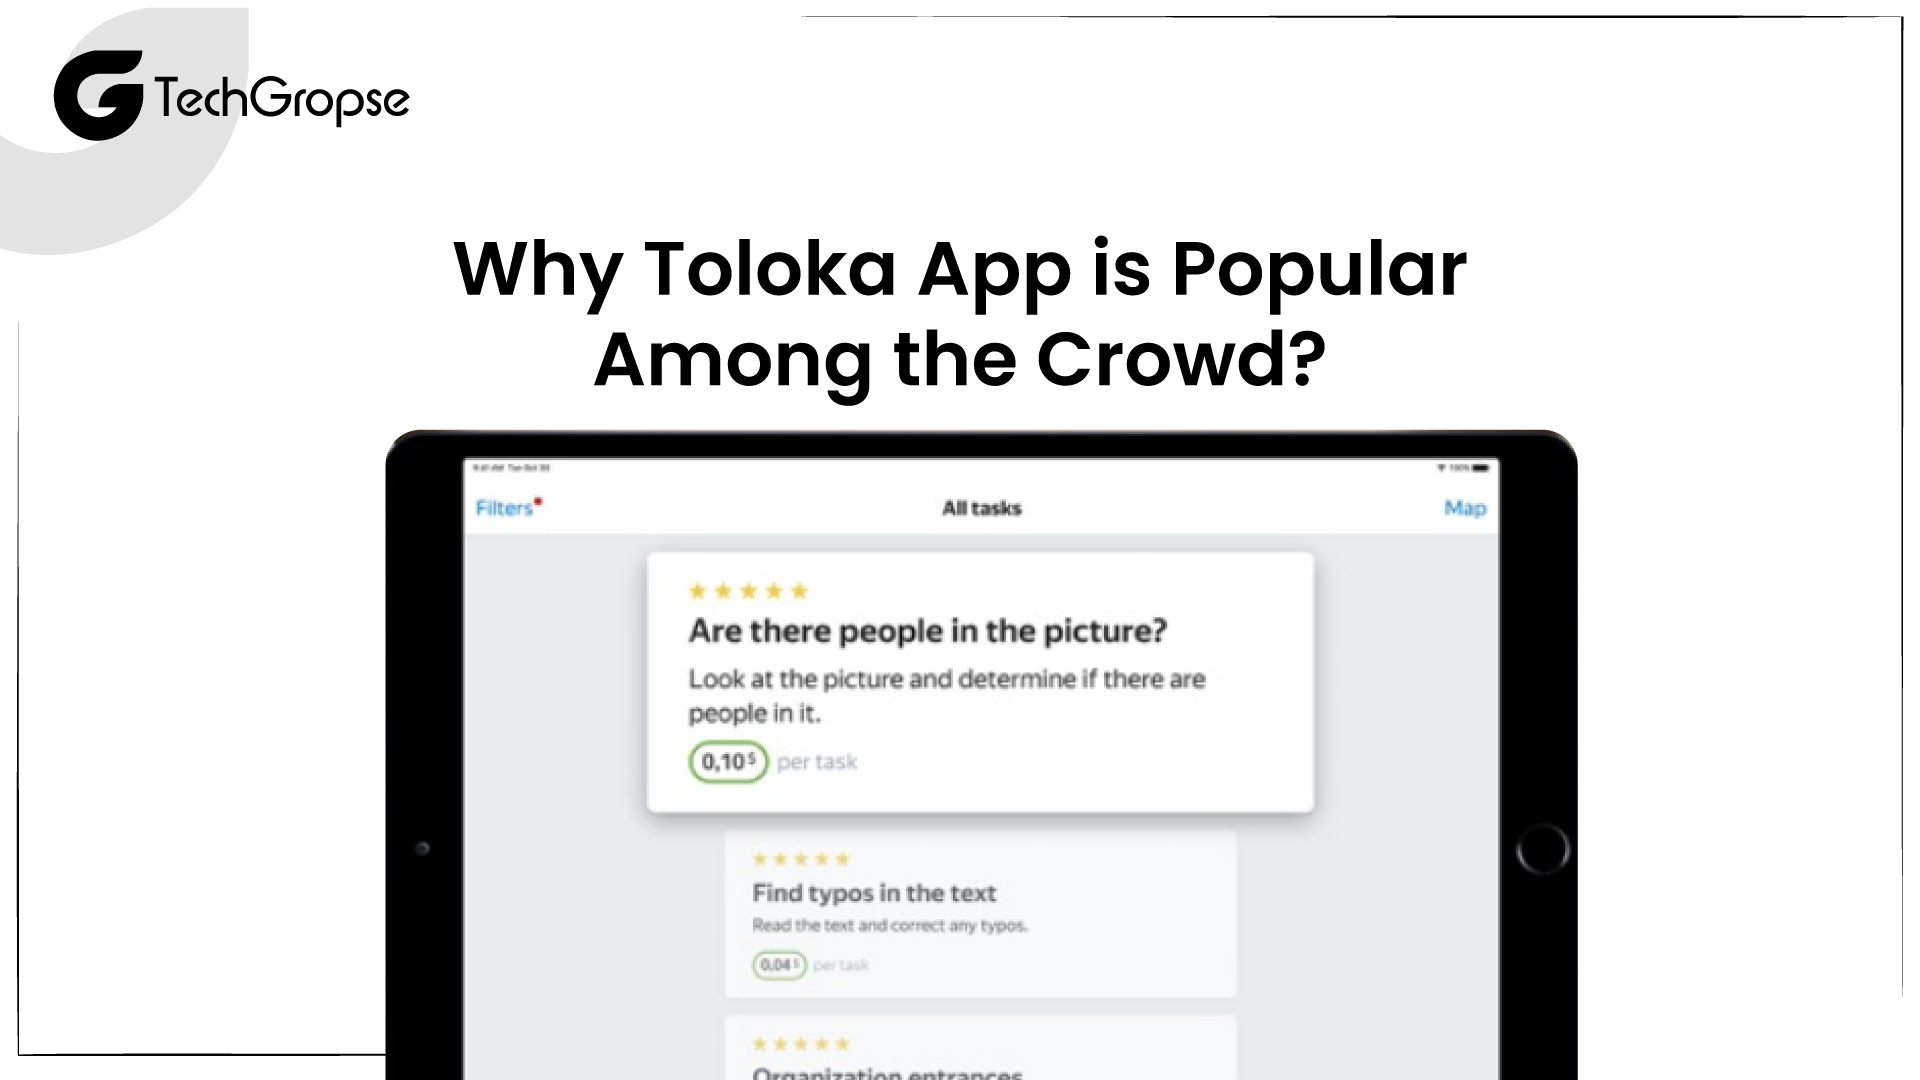 Why Toloka App is Popular Among the Crowd?